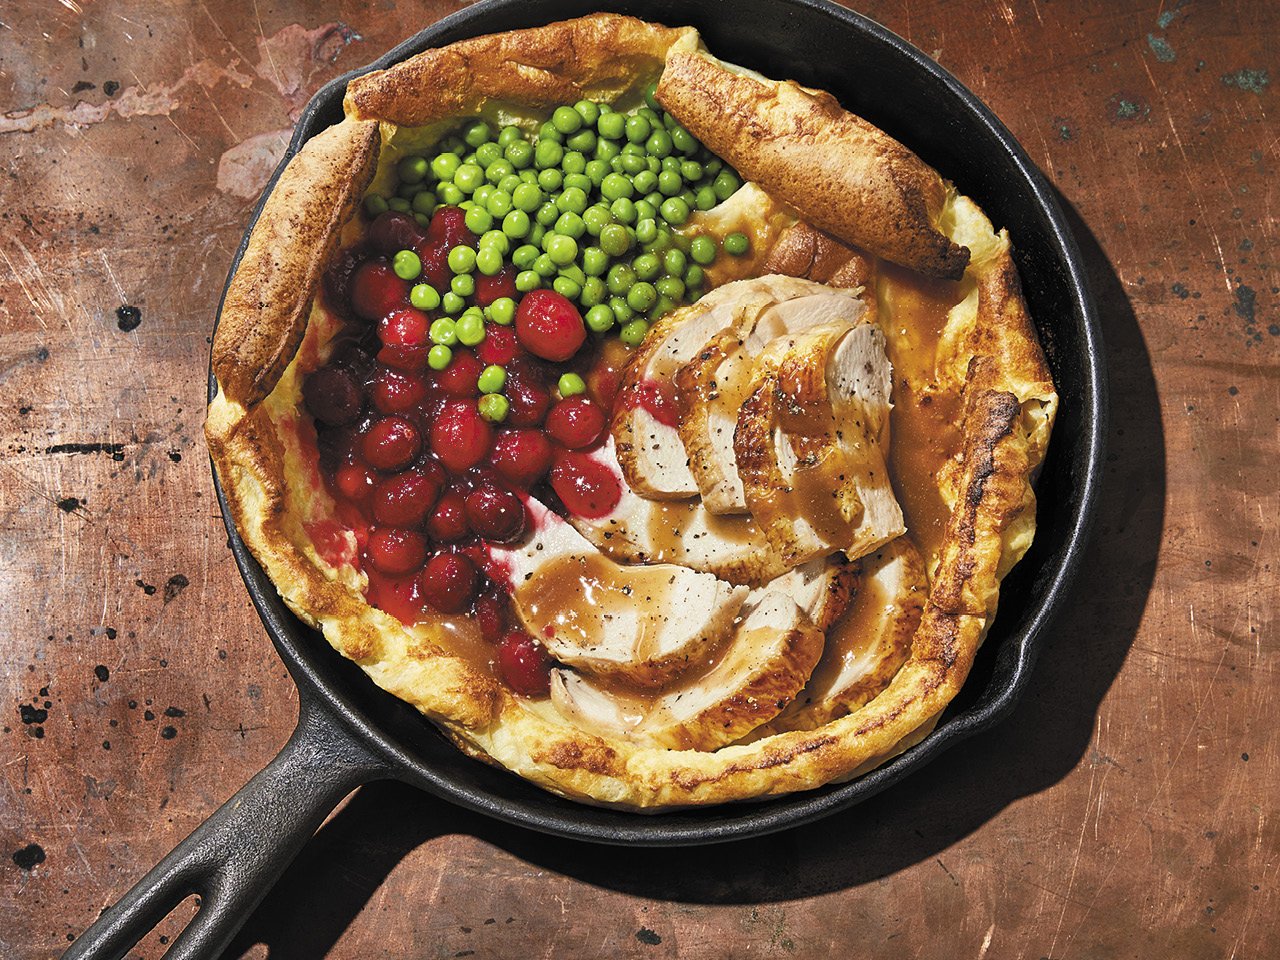 A pan with a Dutch baby filled with chicken, peas and cranberries wooden work surface.